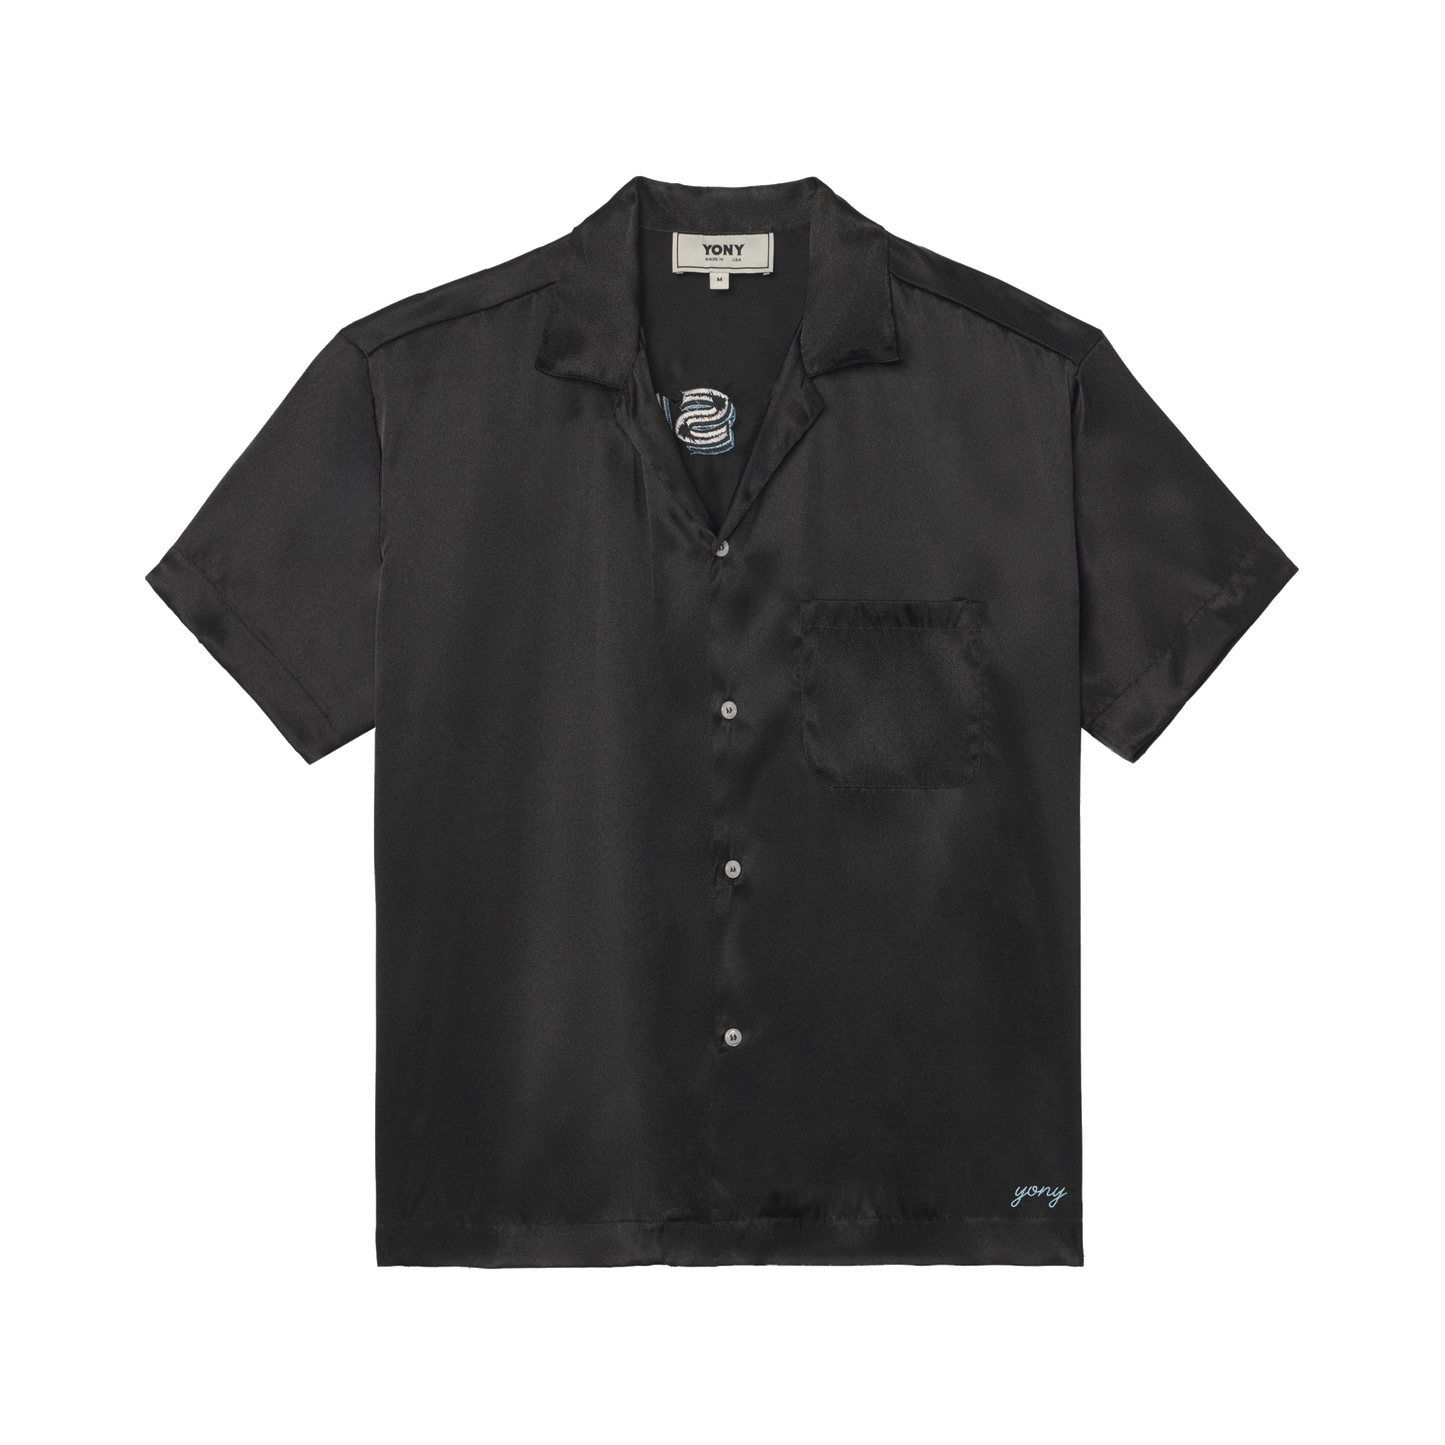 The Show By Niall Horan Black Button Shirt